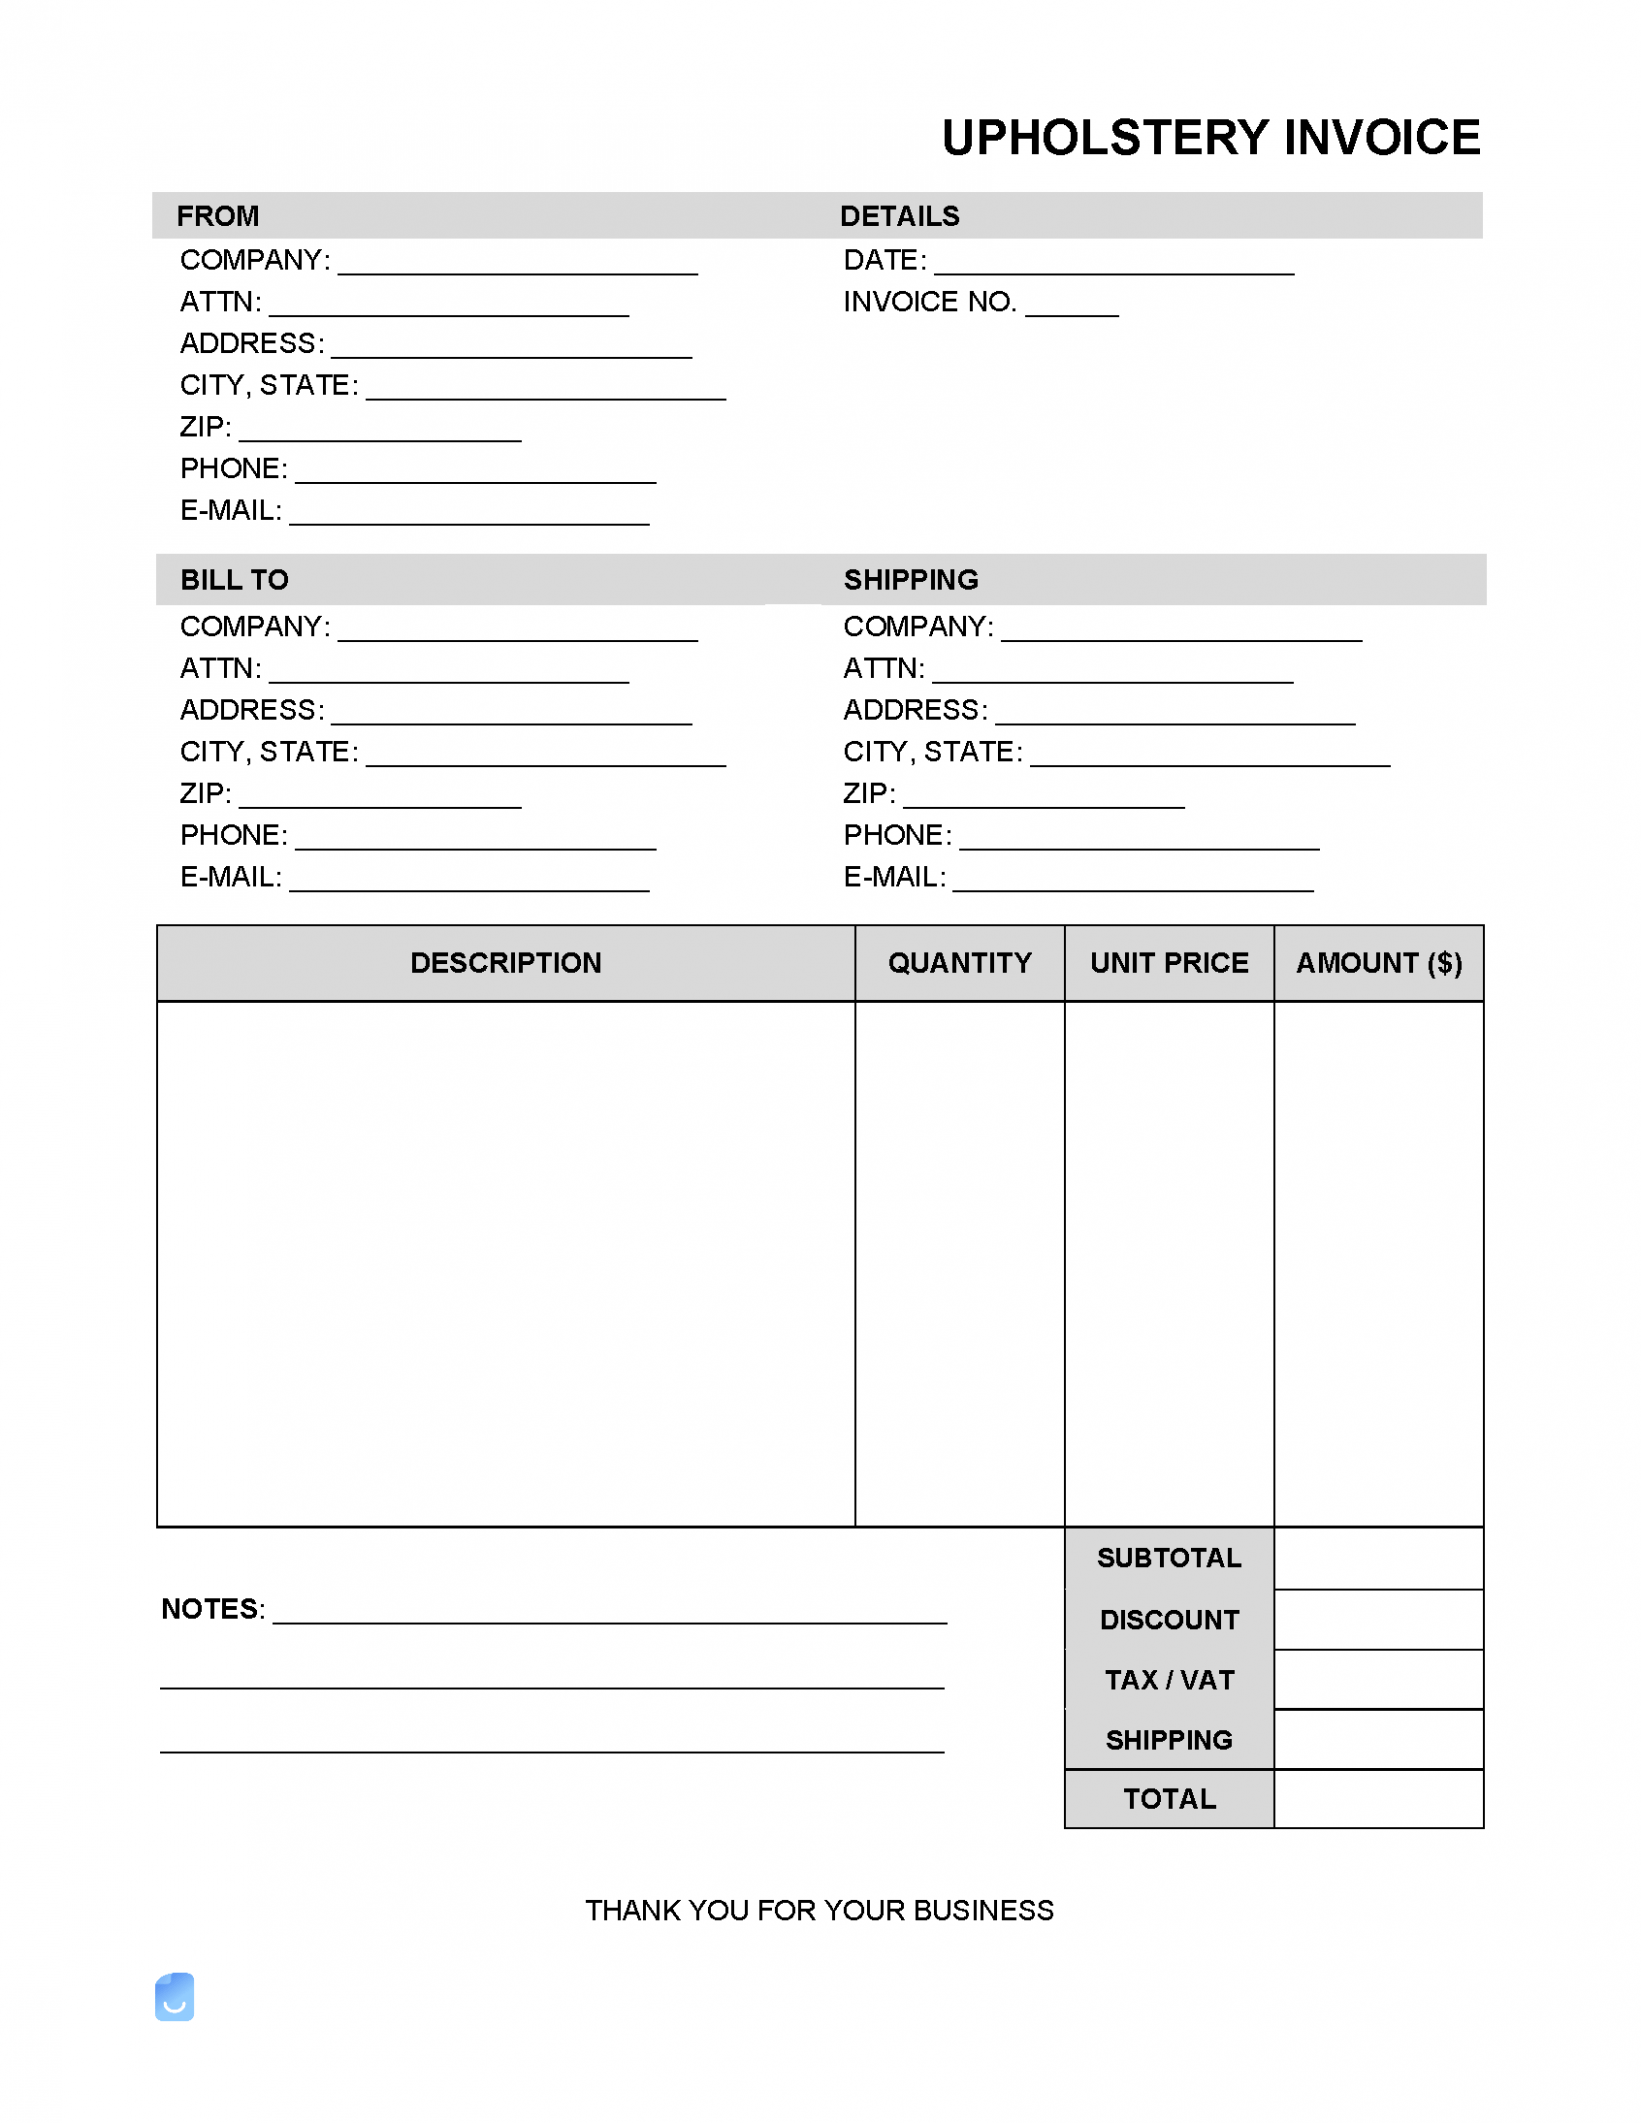 Printable Upholstery Invoice Template Word